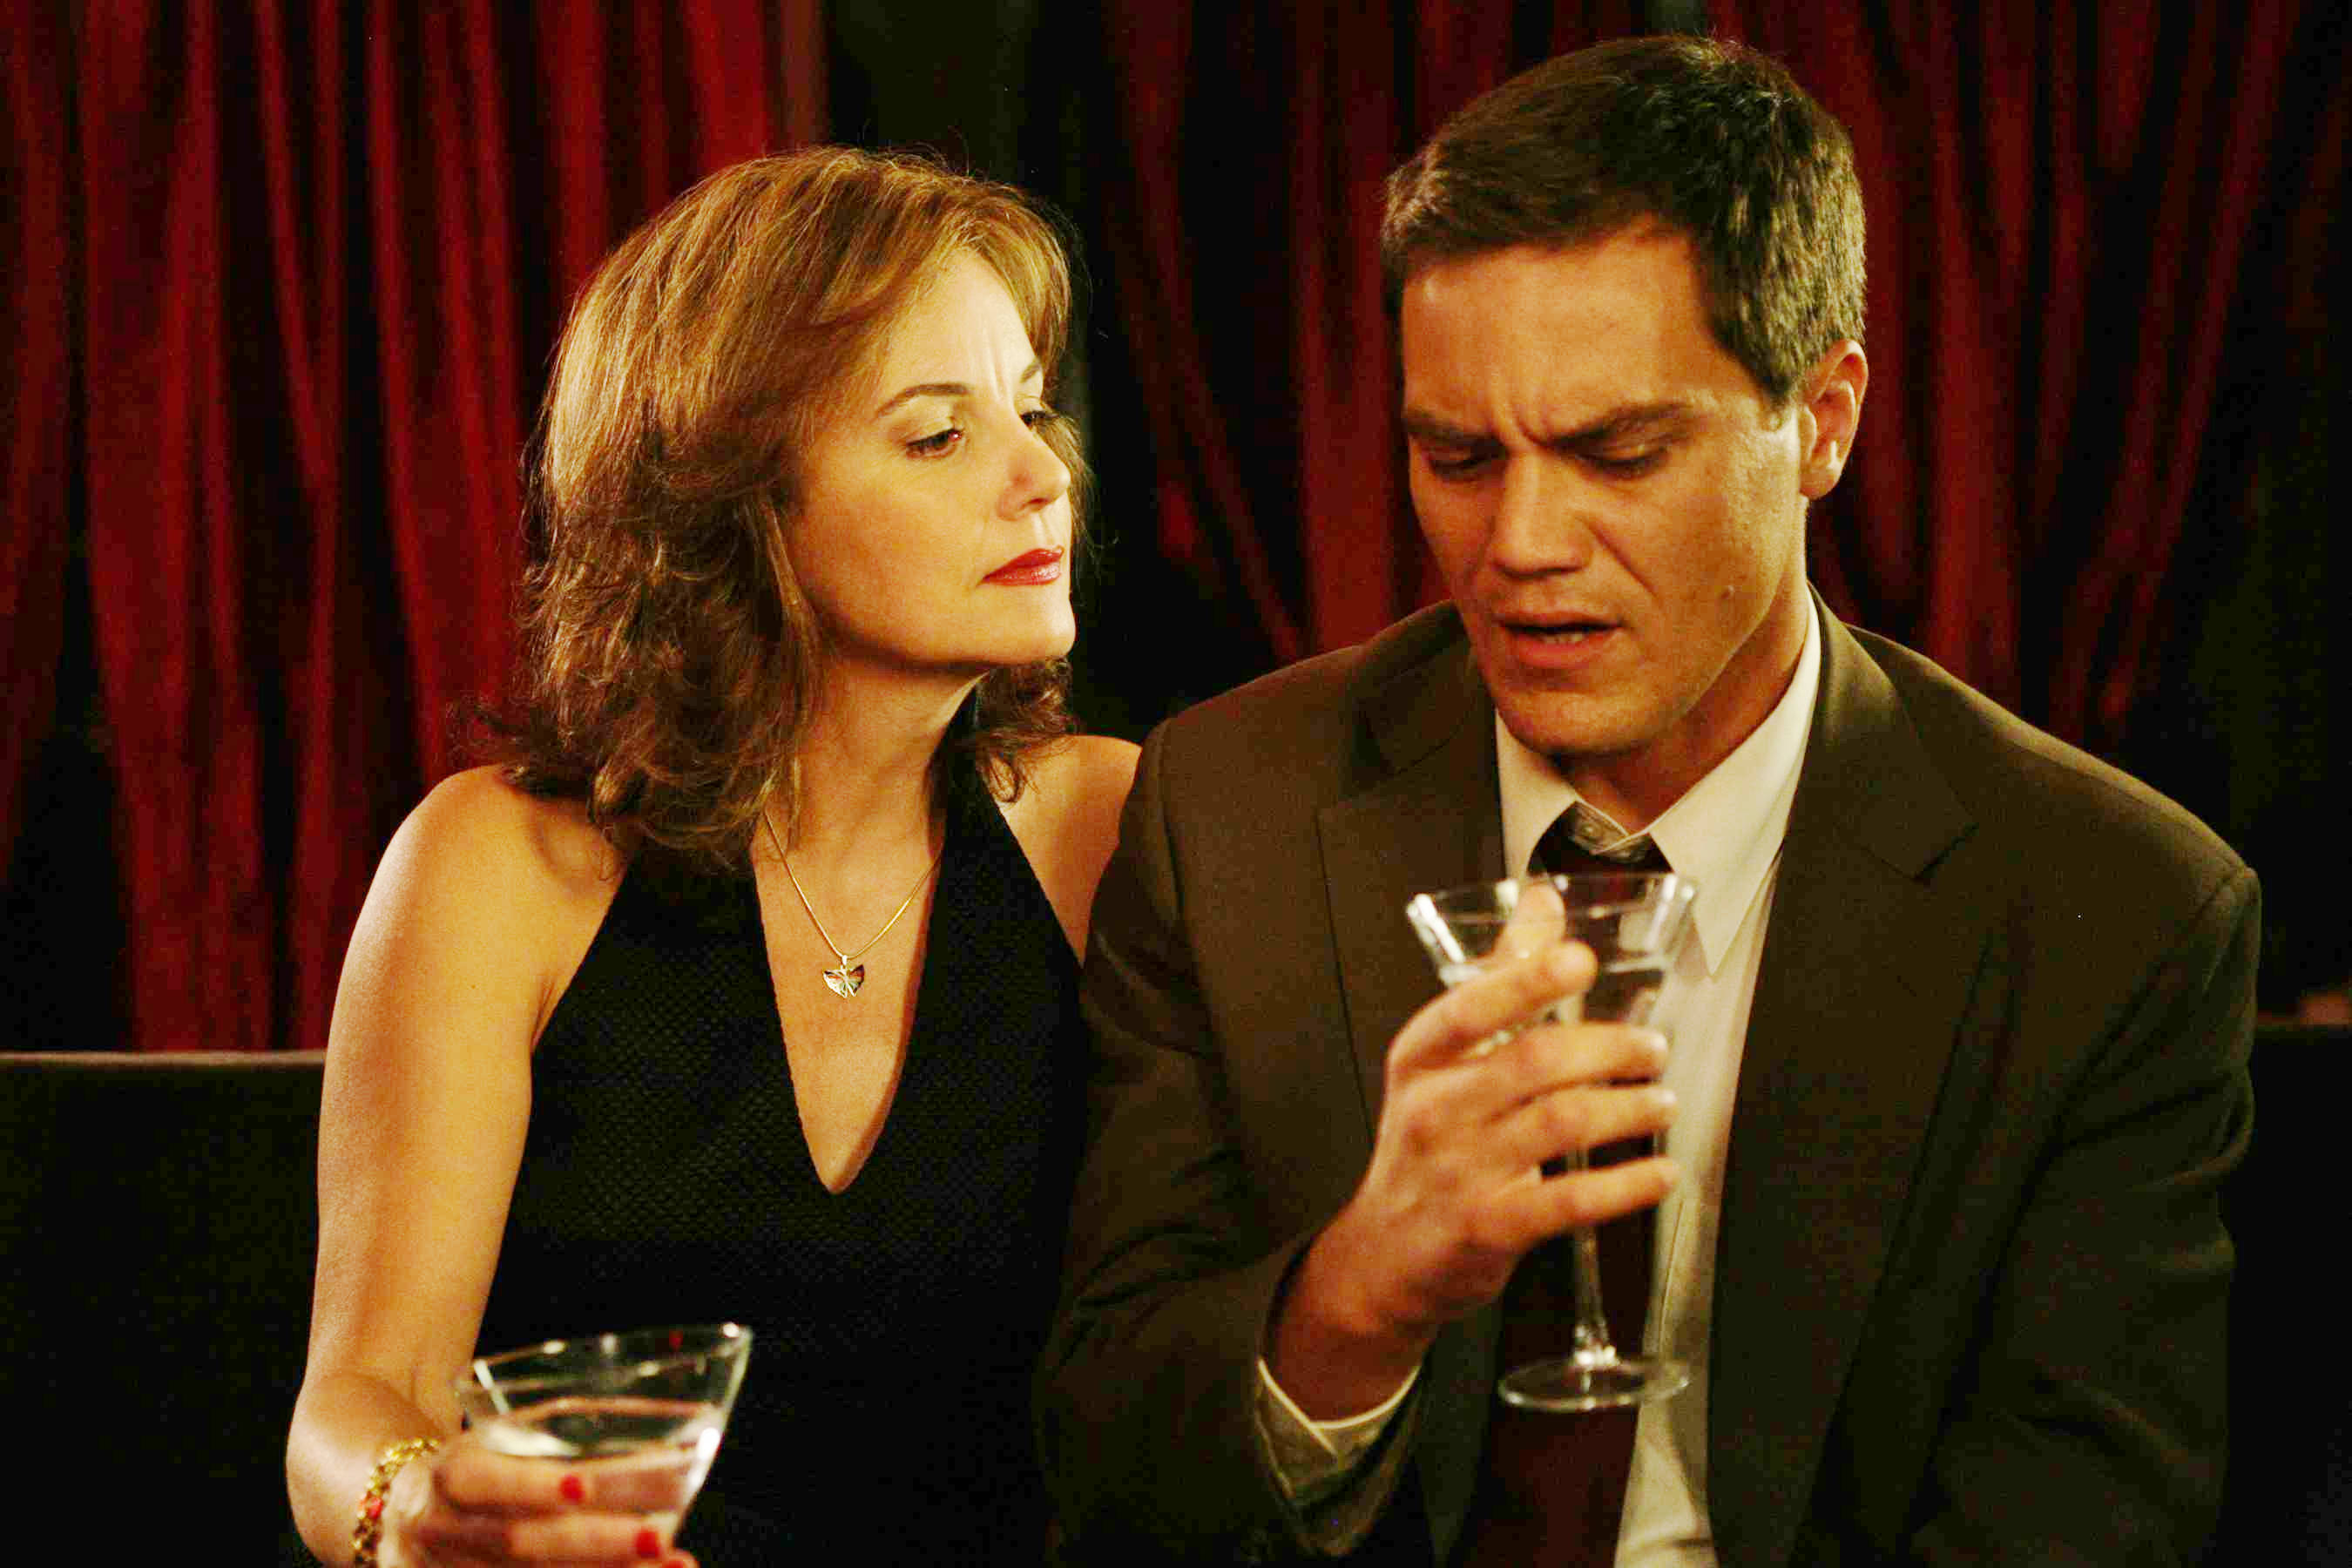 Margaret Colin stars as Lana Cobb and Michael Shannon stars as John Rosow in Strand Releasing's The Missing Person (2009)